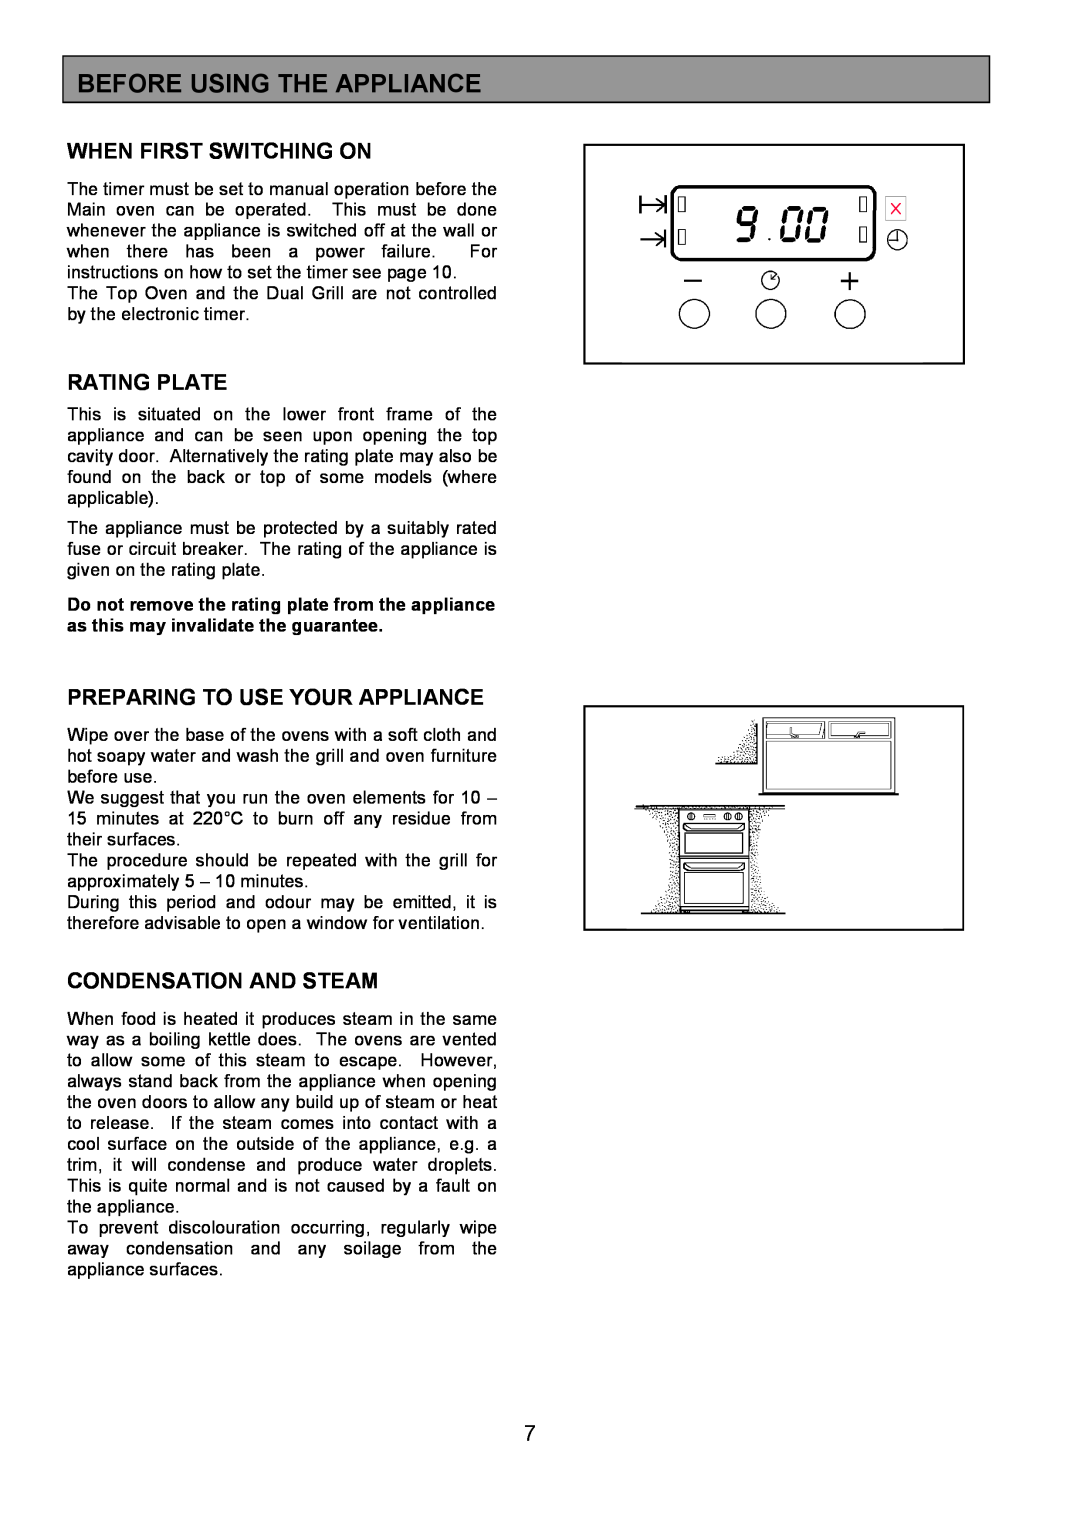 Zanussi 311608901 manual Before Using The Appliance, When First Switching On, Rating Plate, Preparing To Use Your Appliance 